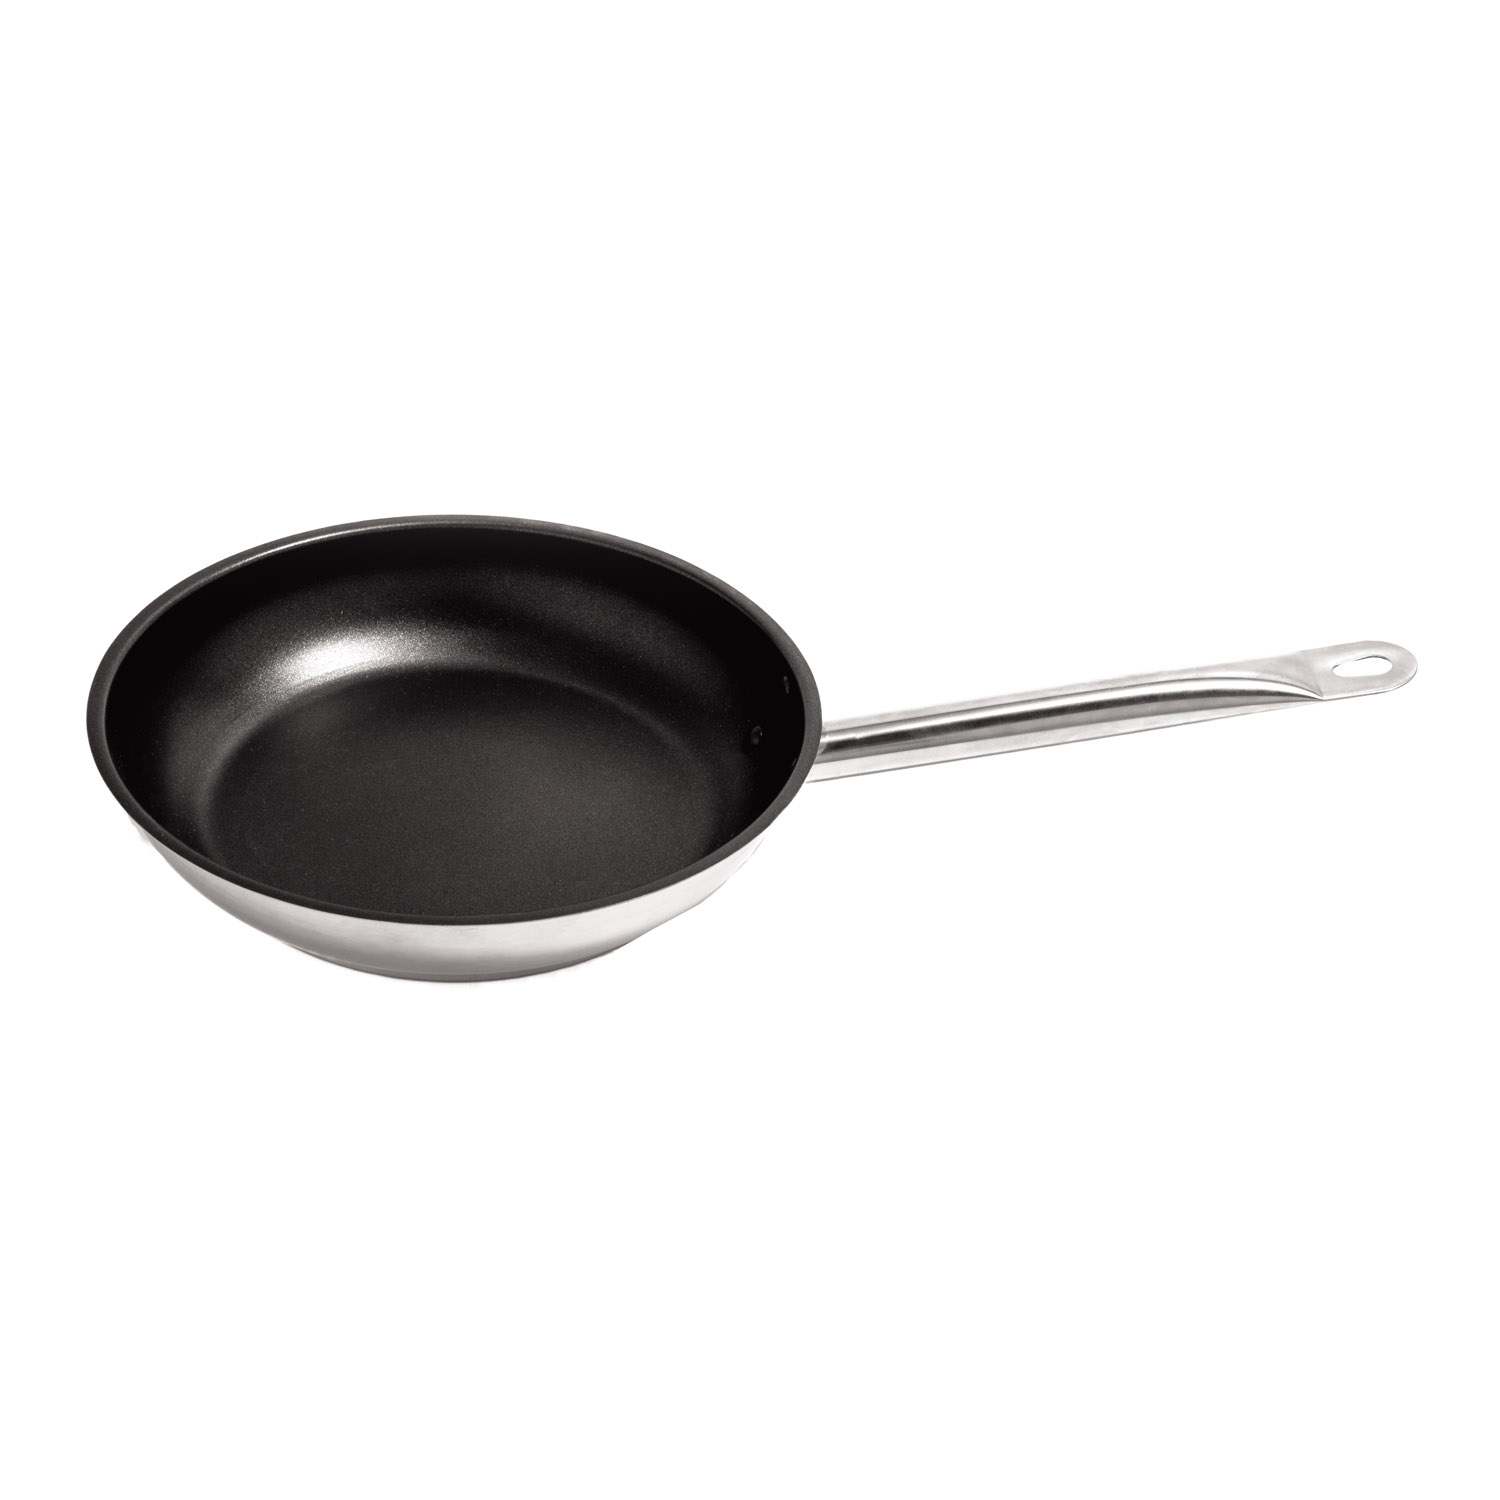 CAC China S2FP-8N Stainless Steel Non-Stick Fry Pan 8"